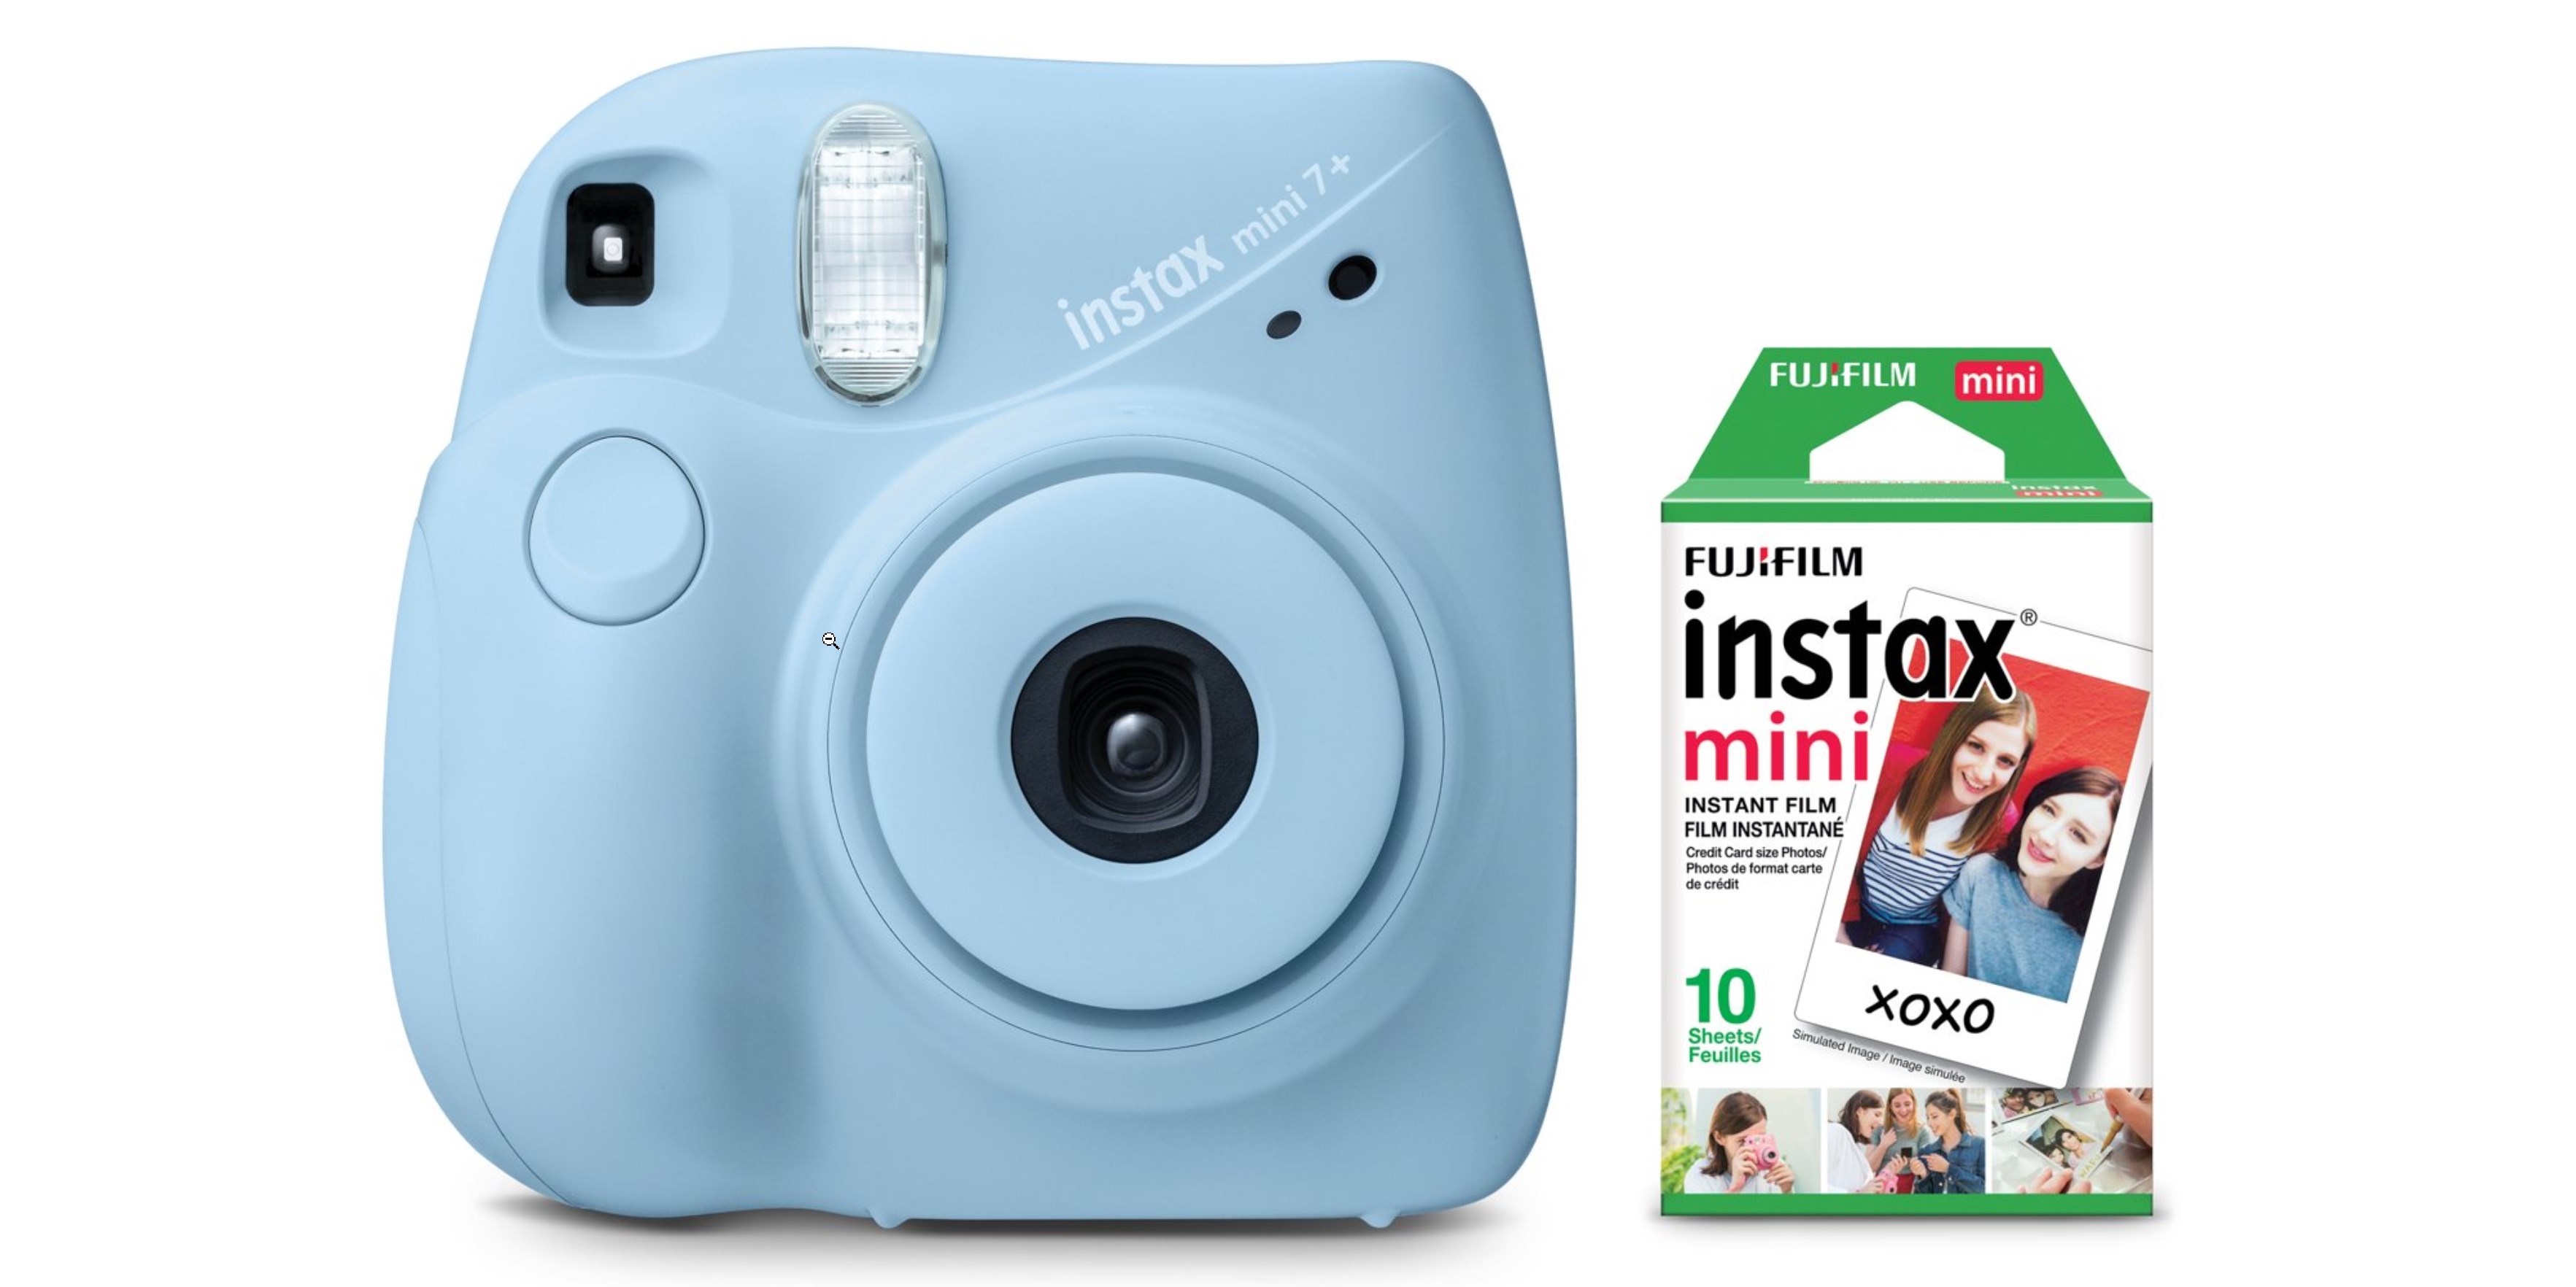 Ronde Schilderen vrachtauto This Polaroid-style Fujifilm instant camera is $49 for Cyber Monday |  Digital Trends